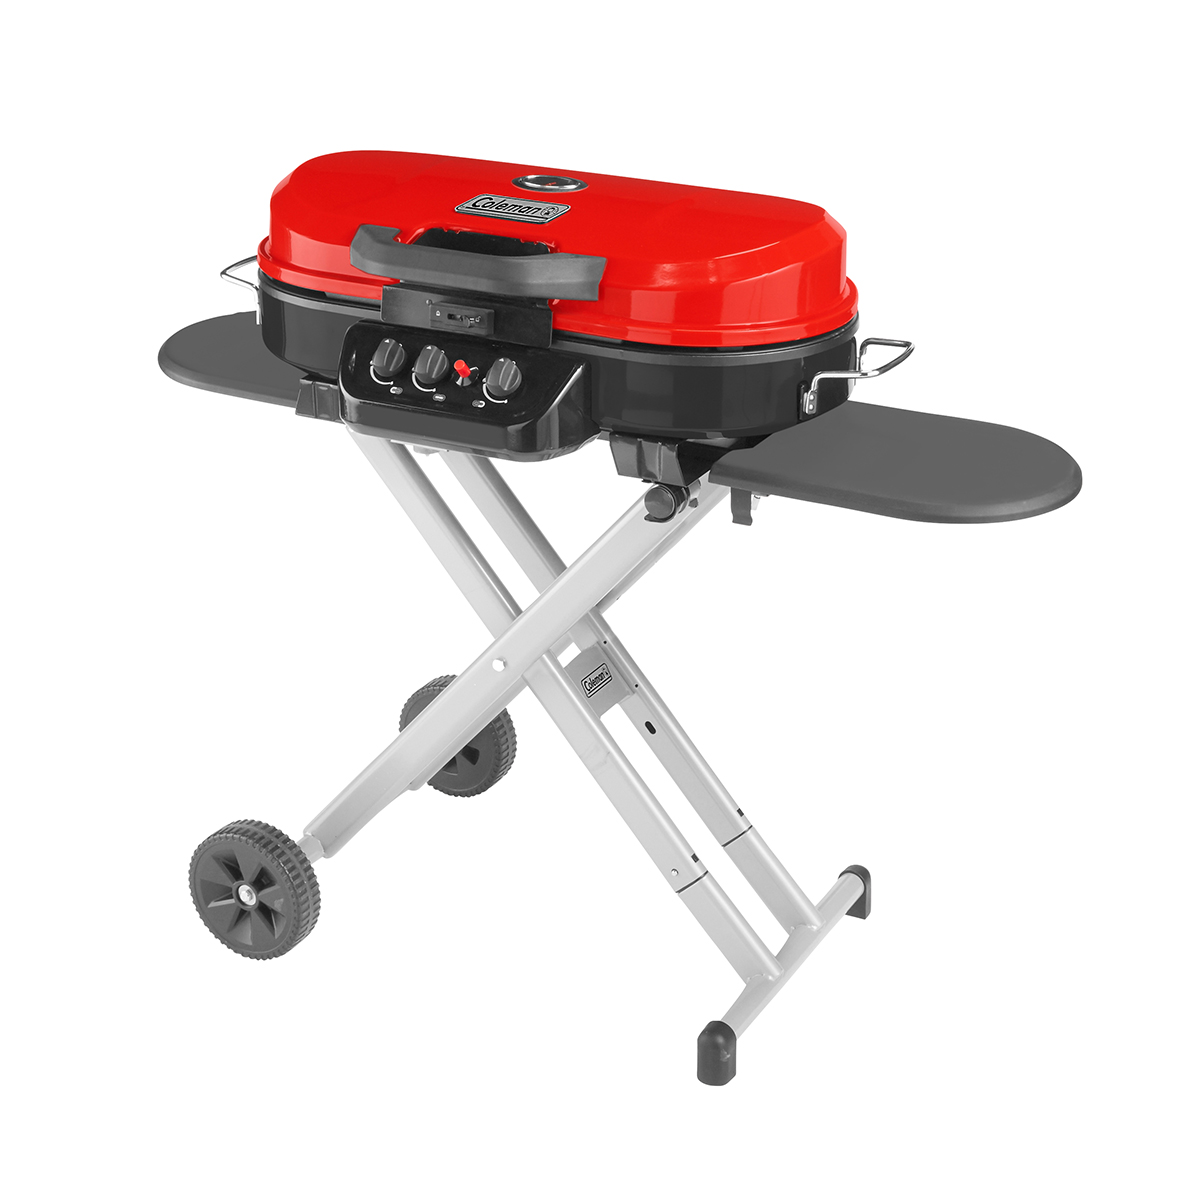 Coleman RoadTrip 285 Standup Propane Gas Grill, Red - image 1 of 8